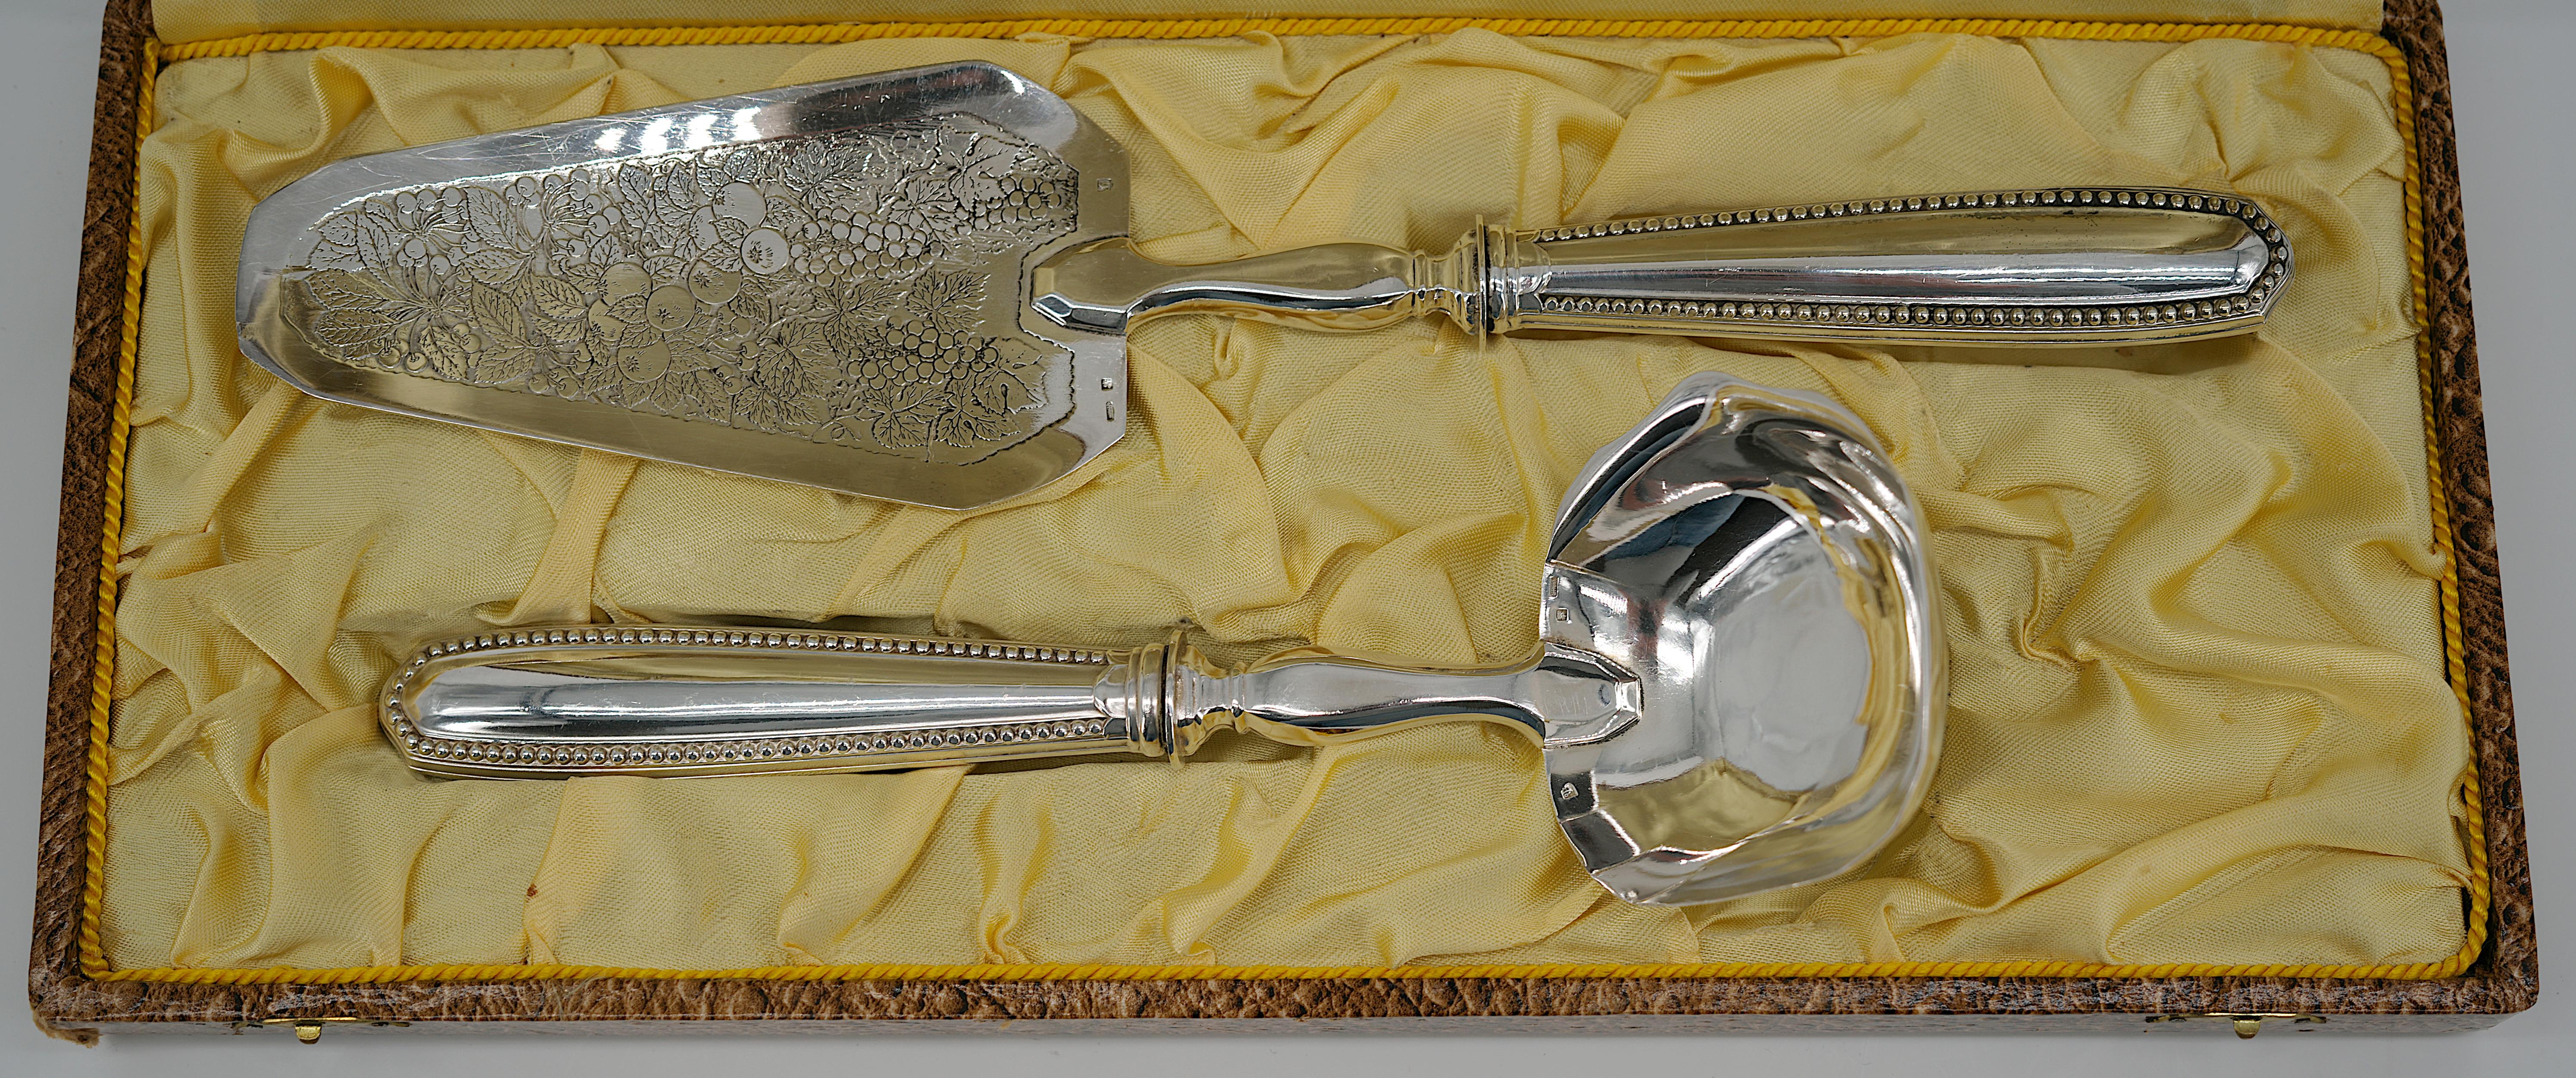 Charles Duchene French Art Deco Silver Plated Dessert Service Cutlery, 1920 For Sale 1